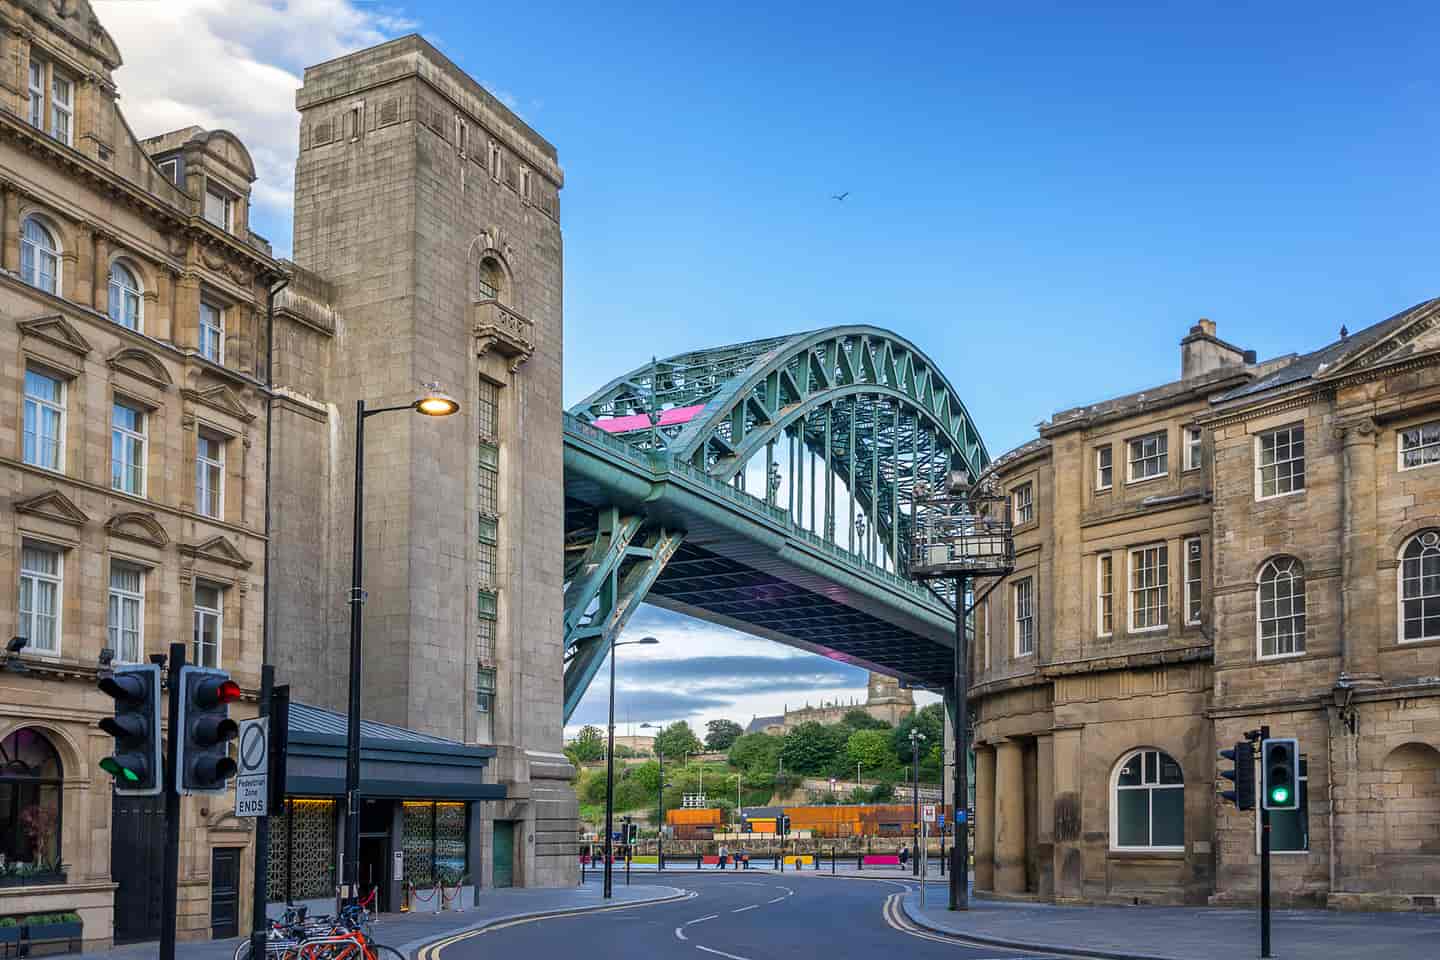 Student Accommodation in Newcastle - Tyne Bridge with The Guildhall in the foreground